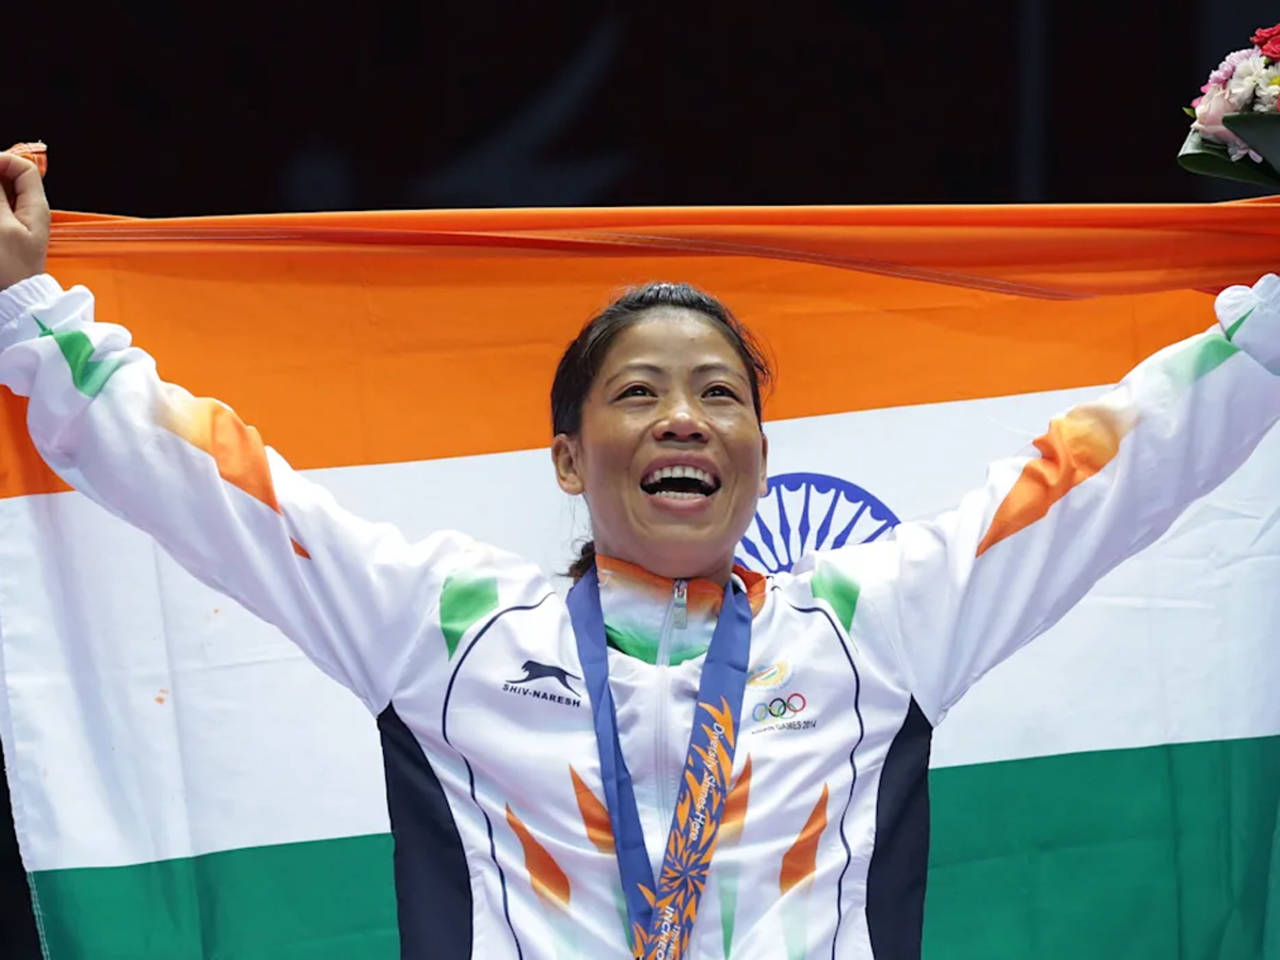 India's Olympic Firsts: Memories of the bronze medal in 2012 make ...